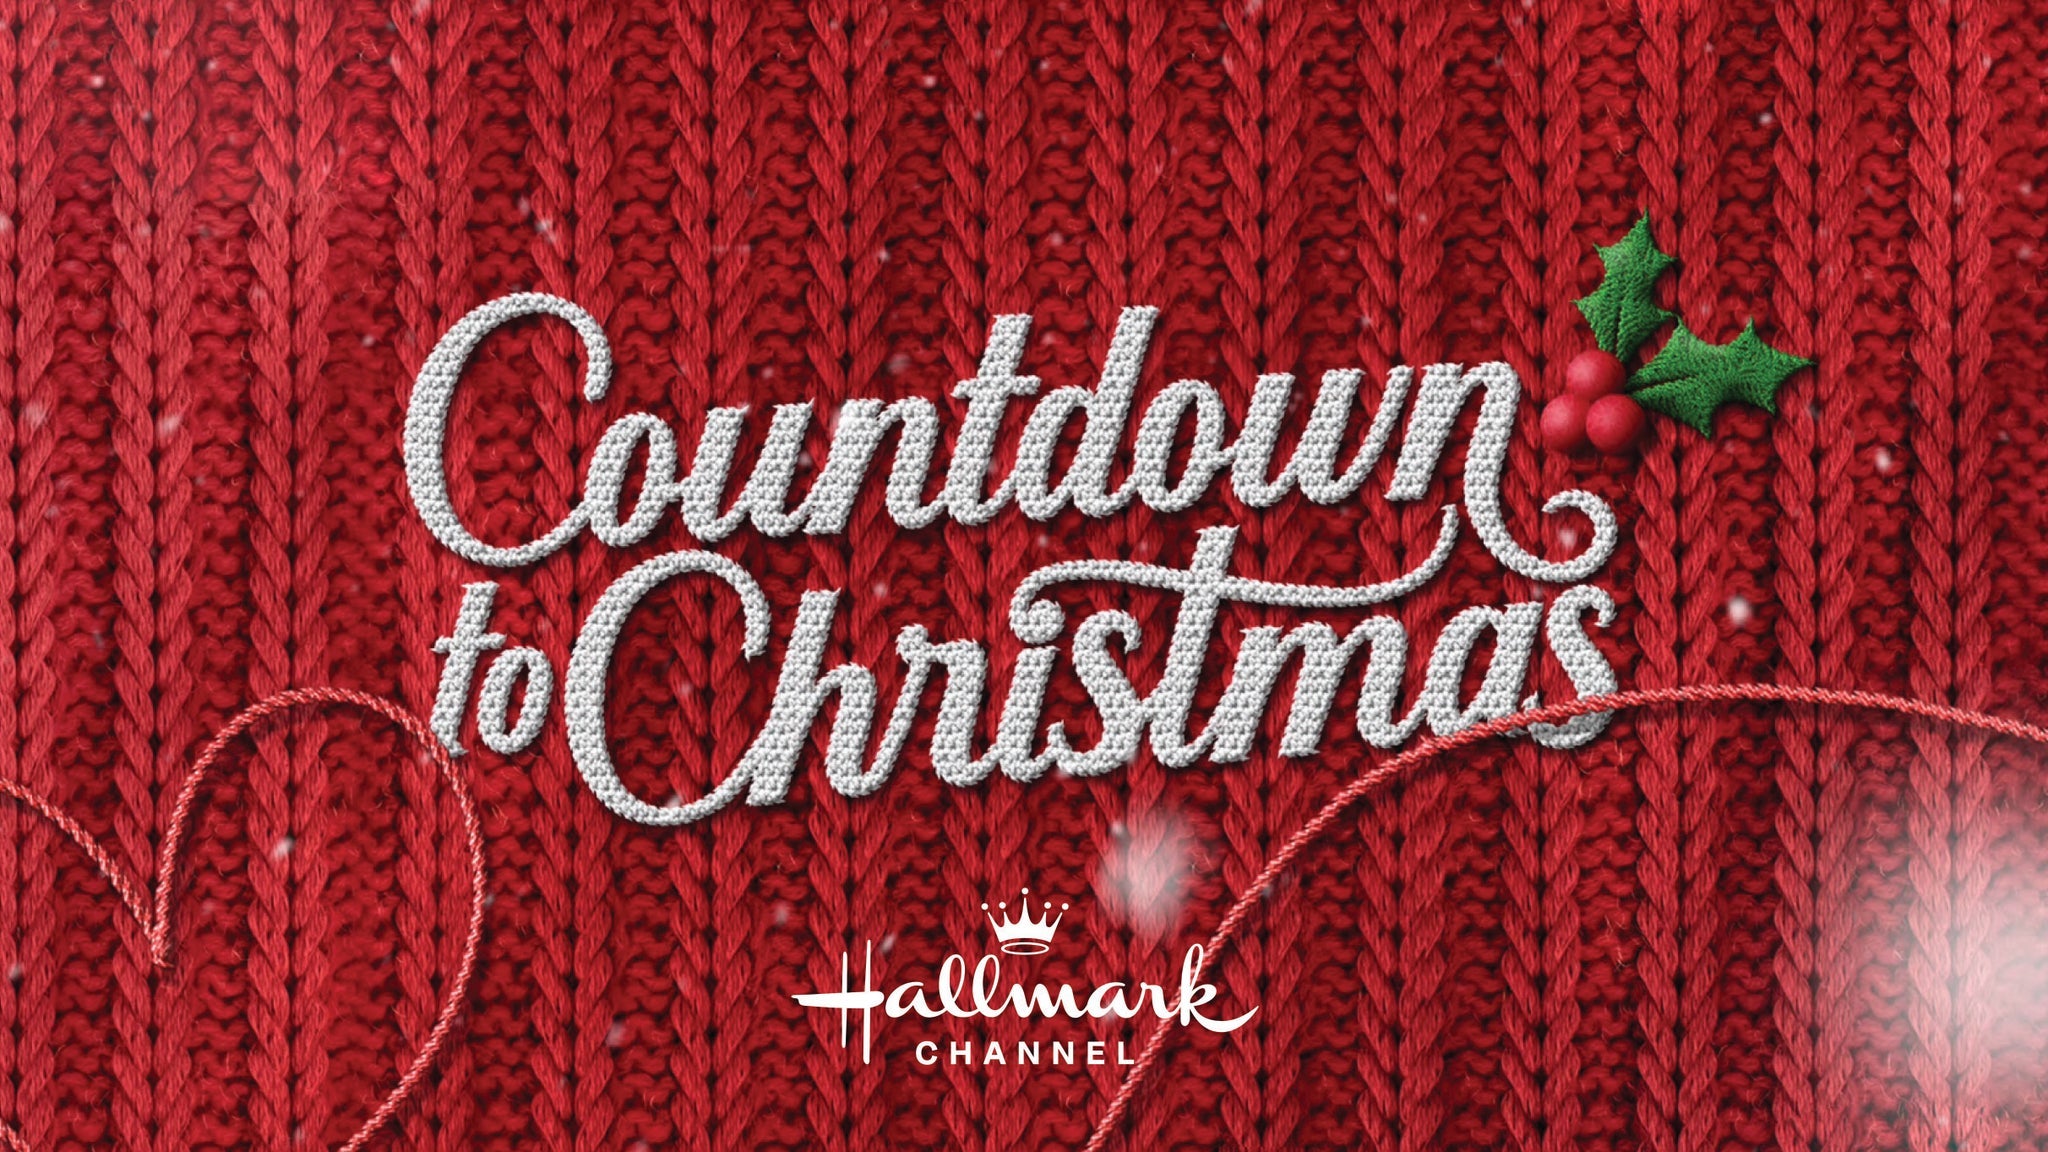 Hallmark Channel Presents Countdown to Christmas Tickets Event Dates